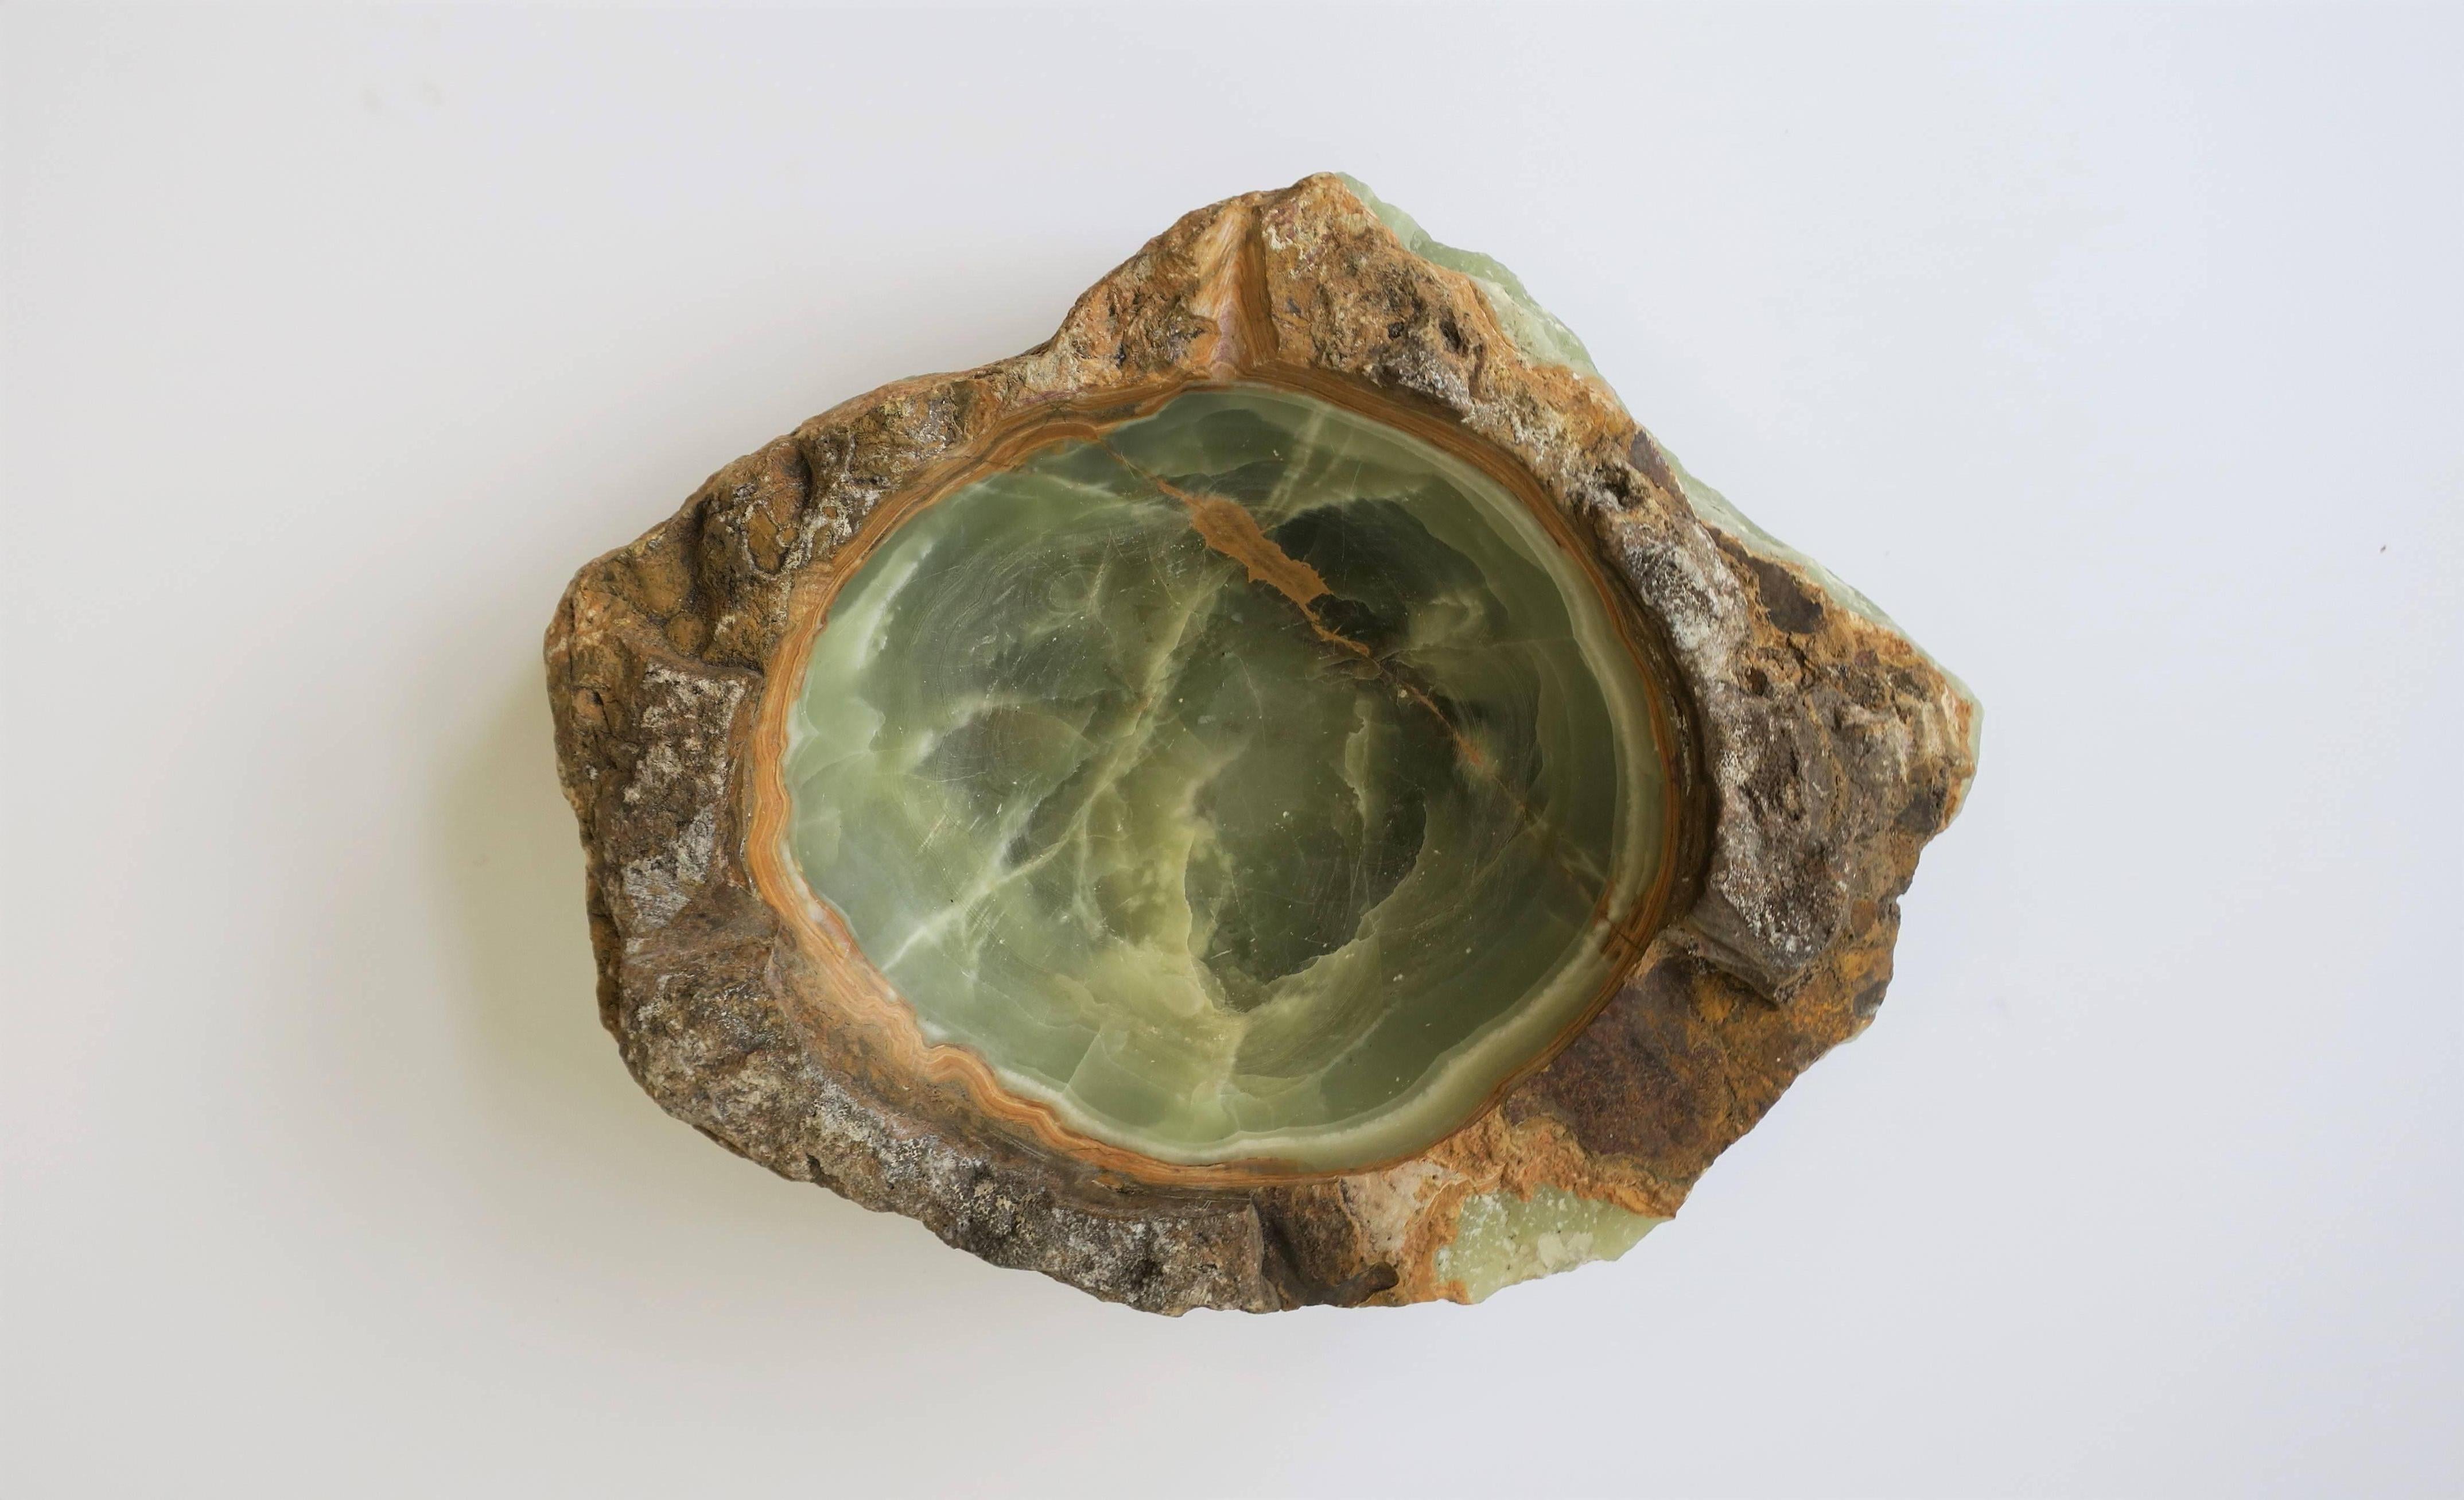 A beautiful and relatively large/substantial green onyx marble natural organic vessel, vide-poche (catch-all), or bowl sculpture piece. Quarter/.25 cent piece in images #3 and 4 for size perspective.

Piece measures: 8.5